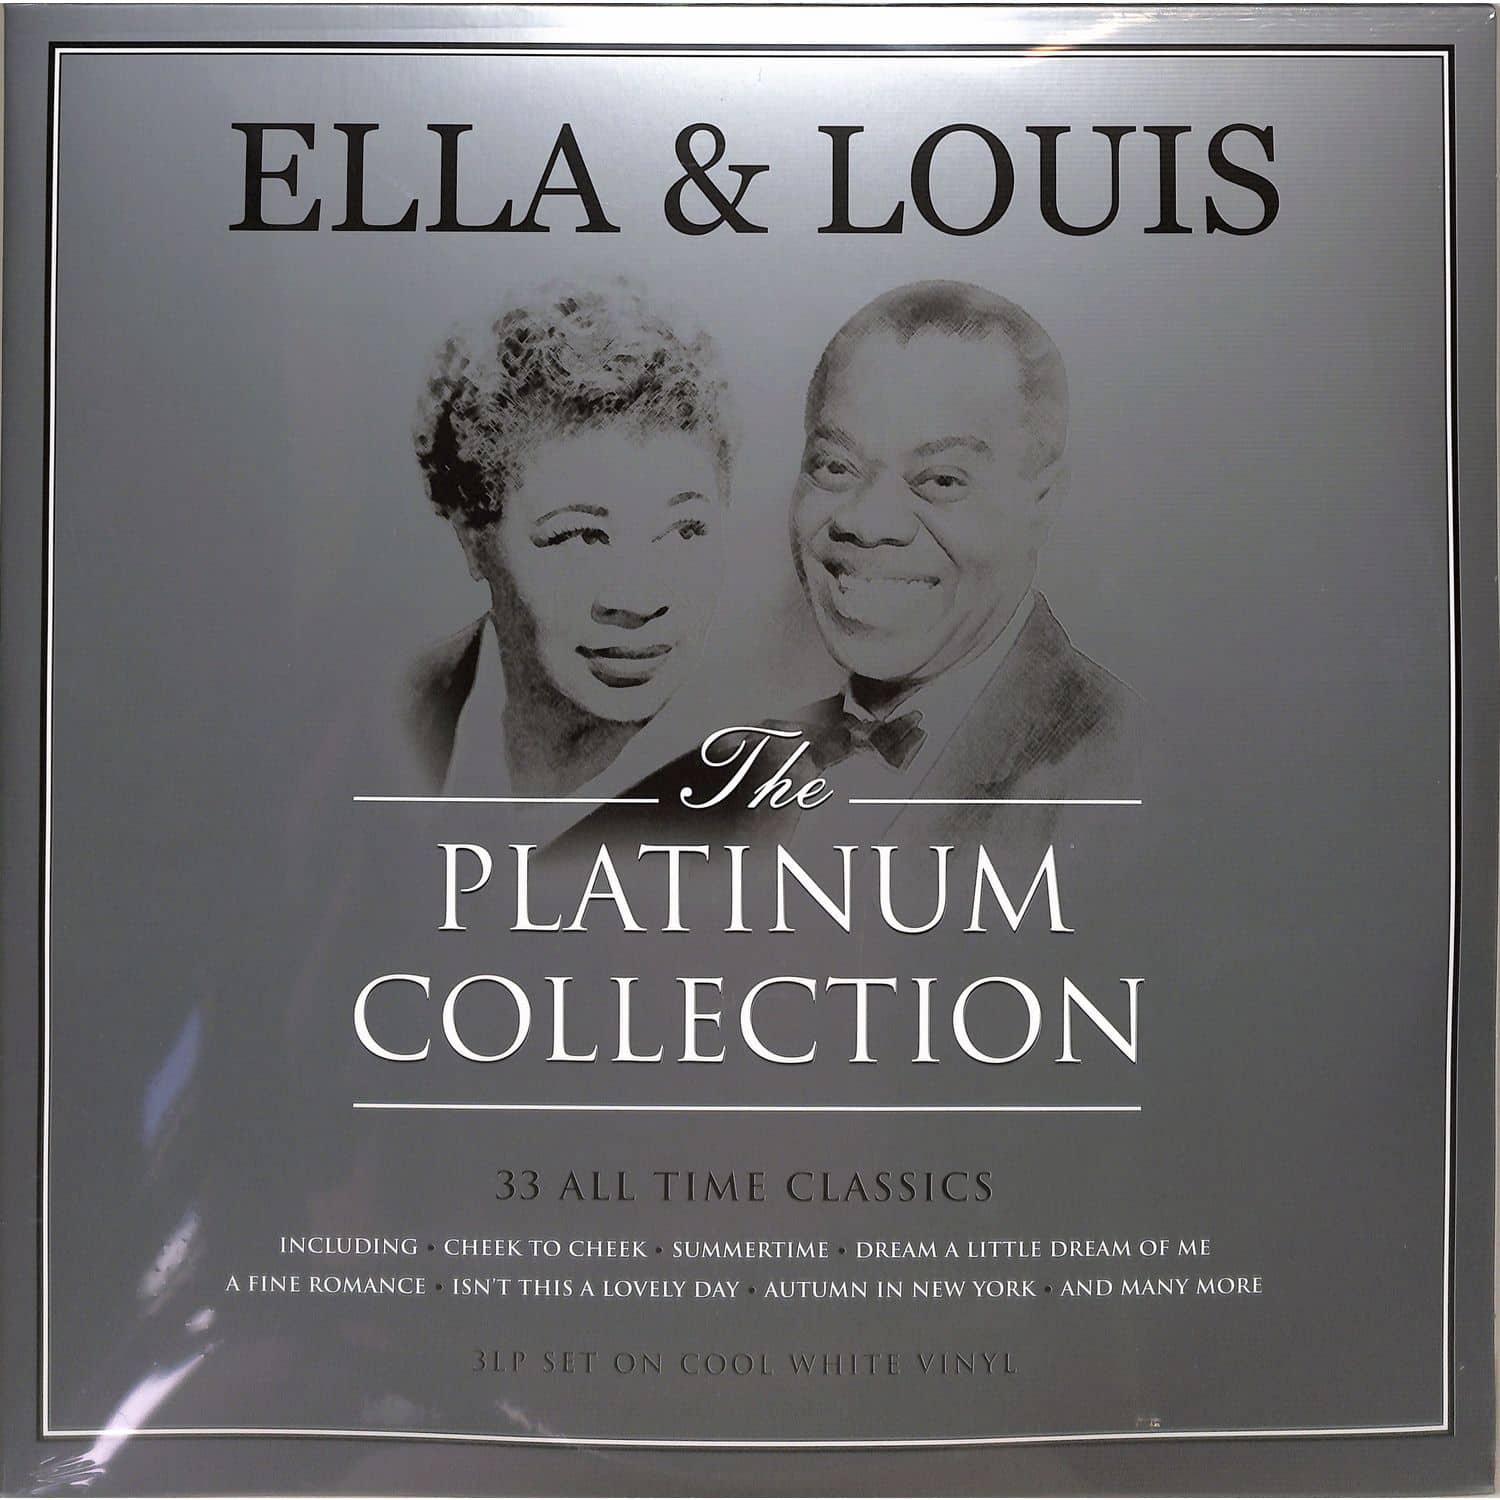 Ella Fitzgerald & Louis Armstrong - PLATINUM COLLECTION 